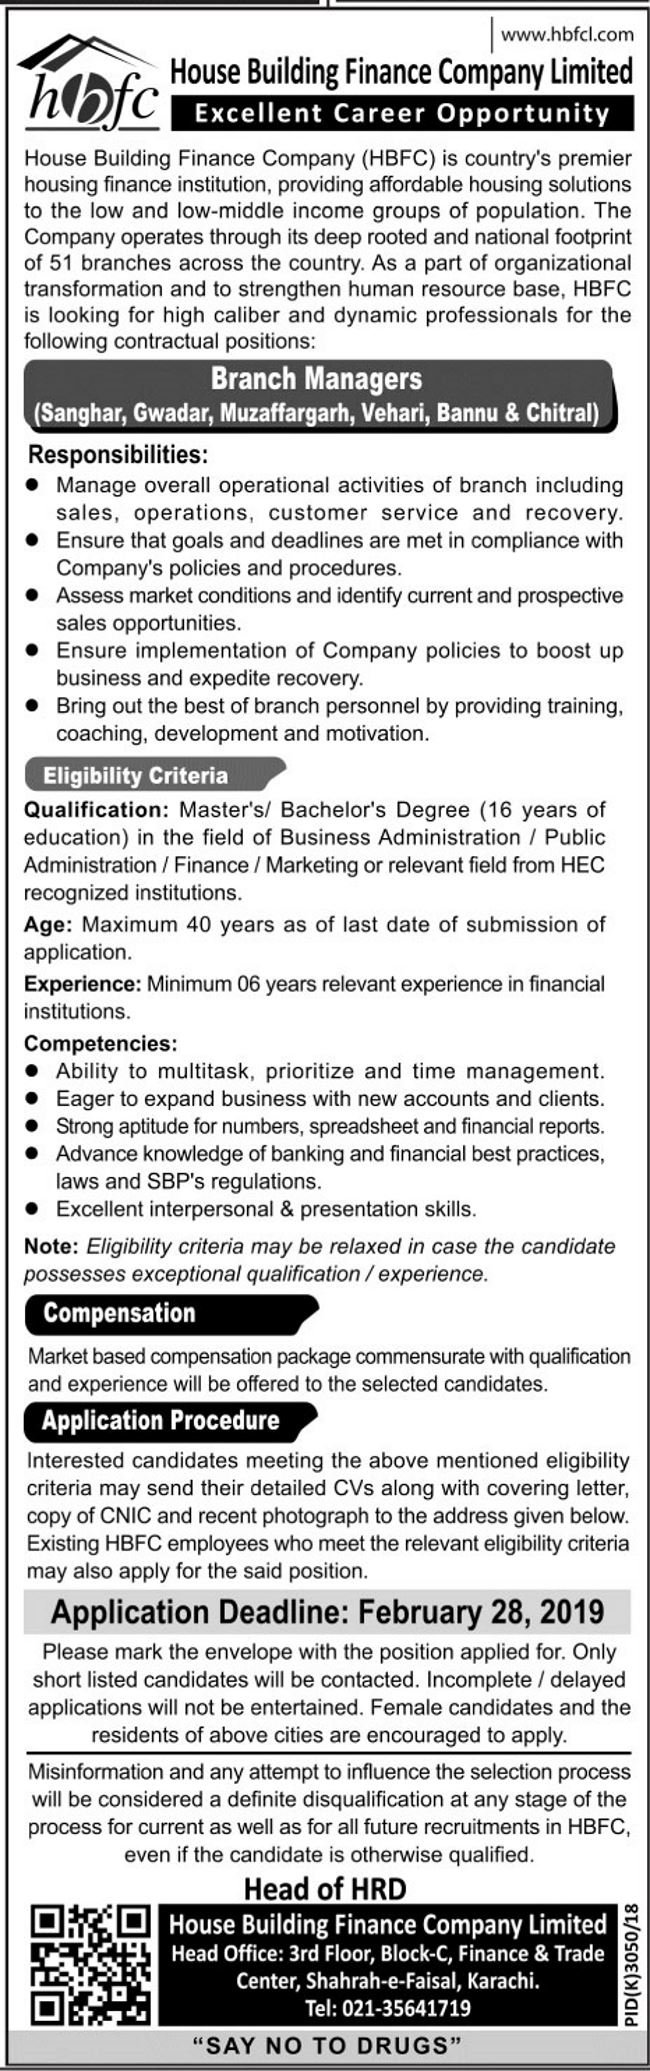 HBFC Jobs 2019 for Branch Managers (Multiple Cities)